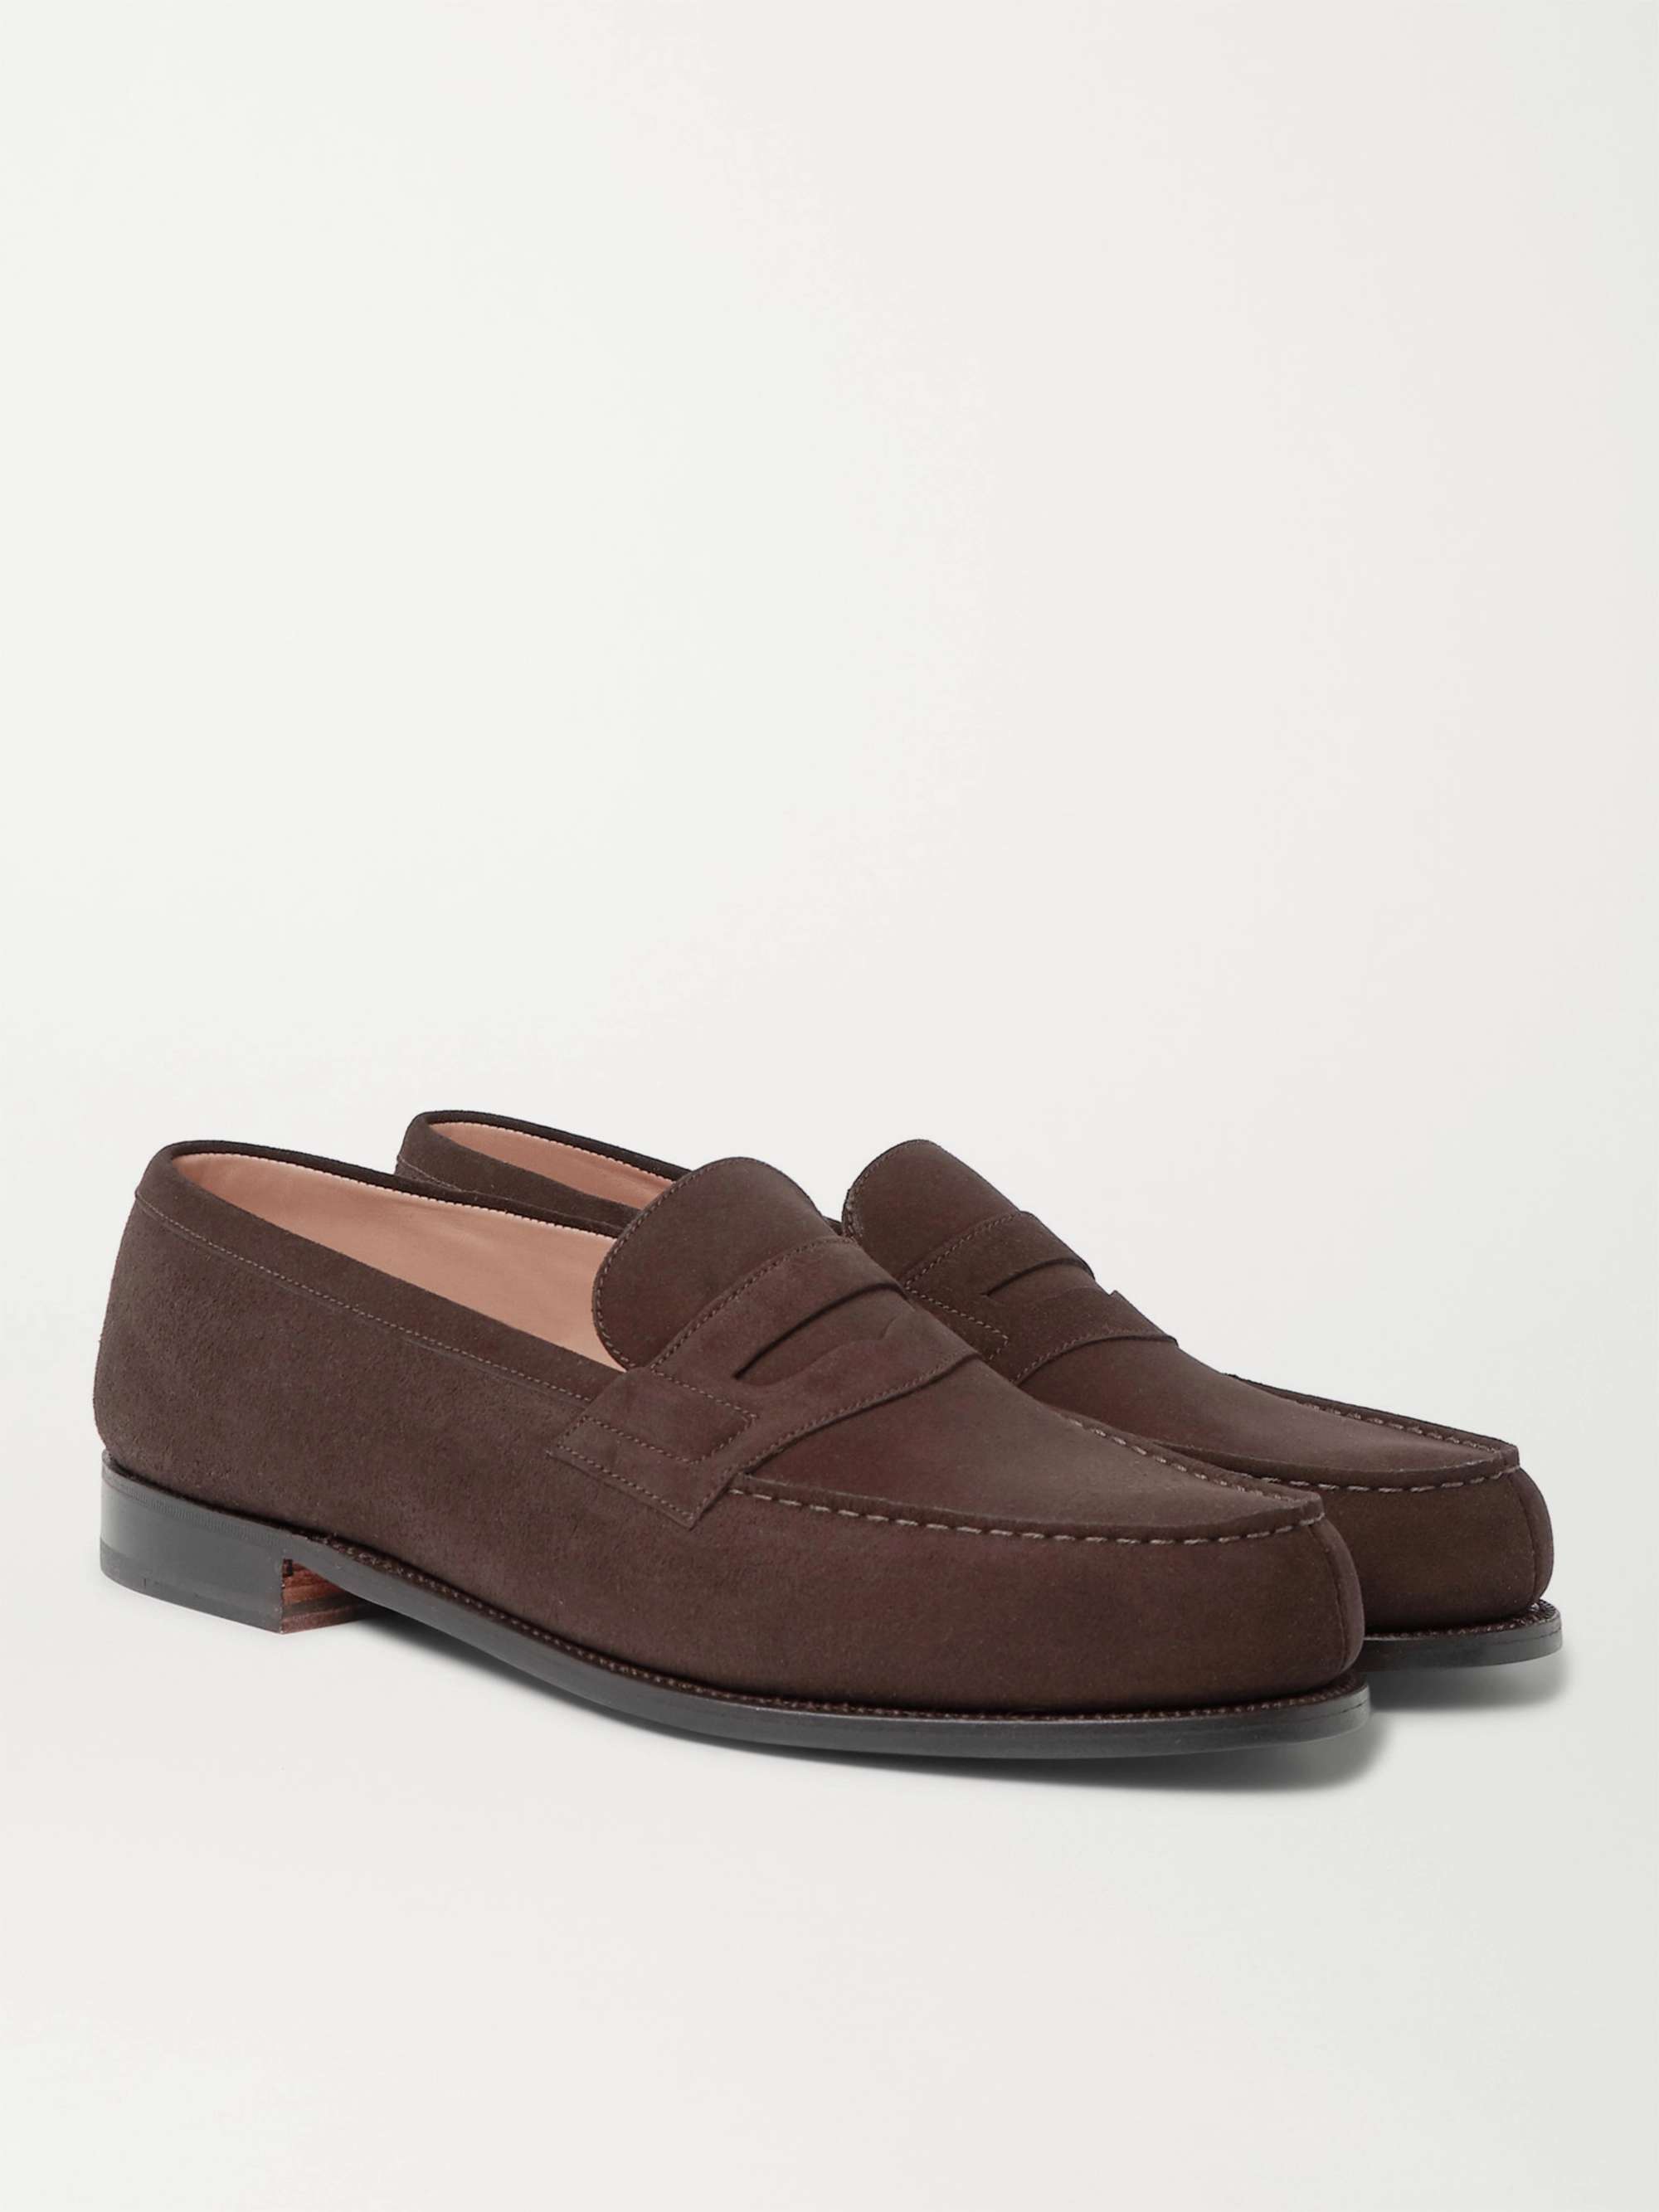 J.M. WESTON 180 Moccasin Suede Loafers